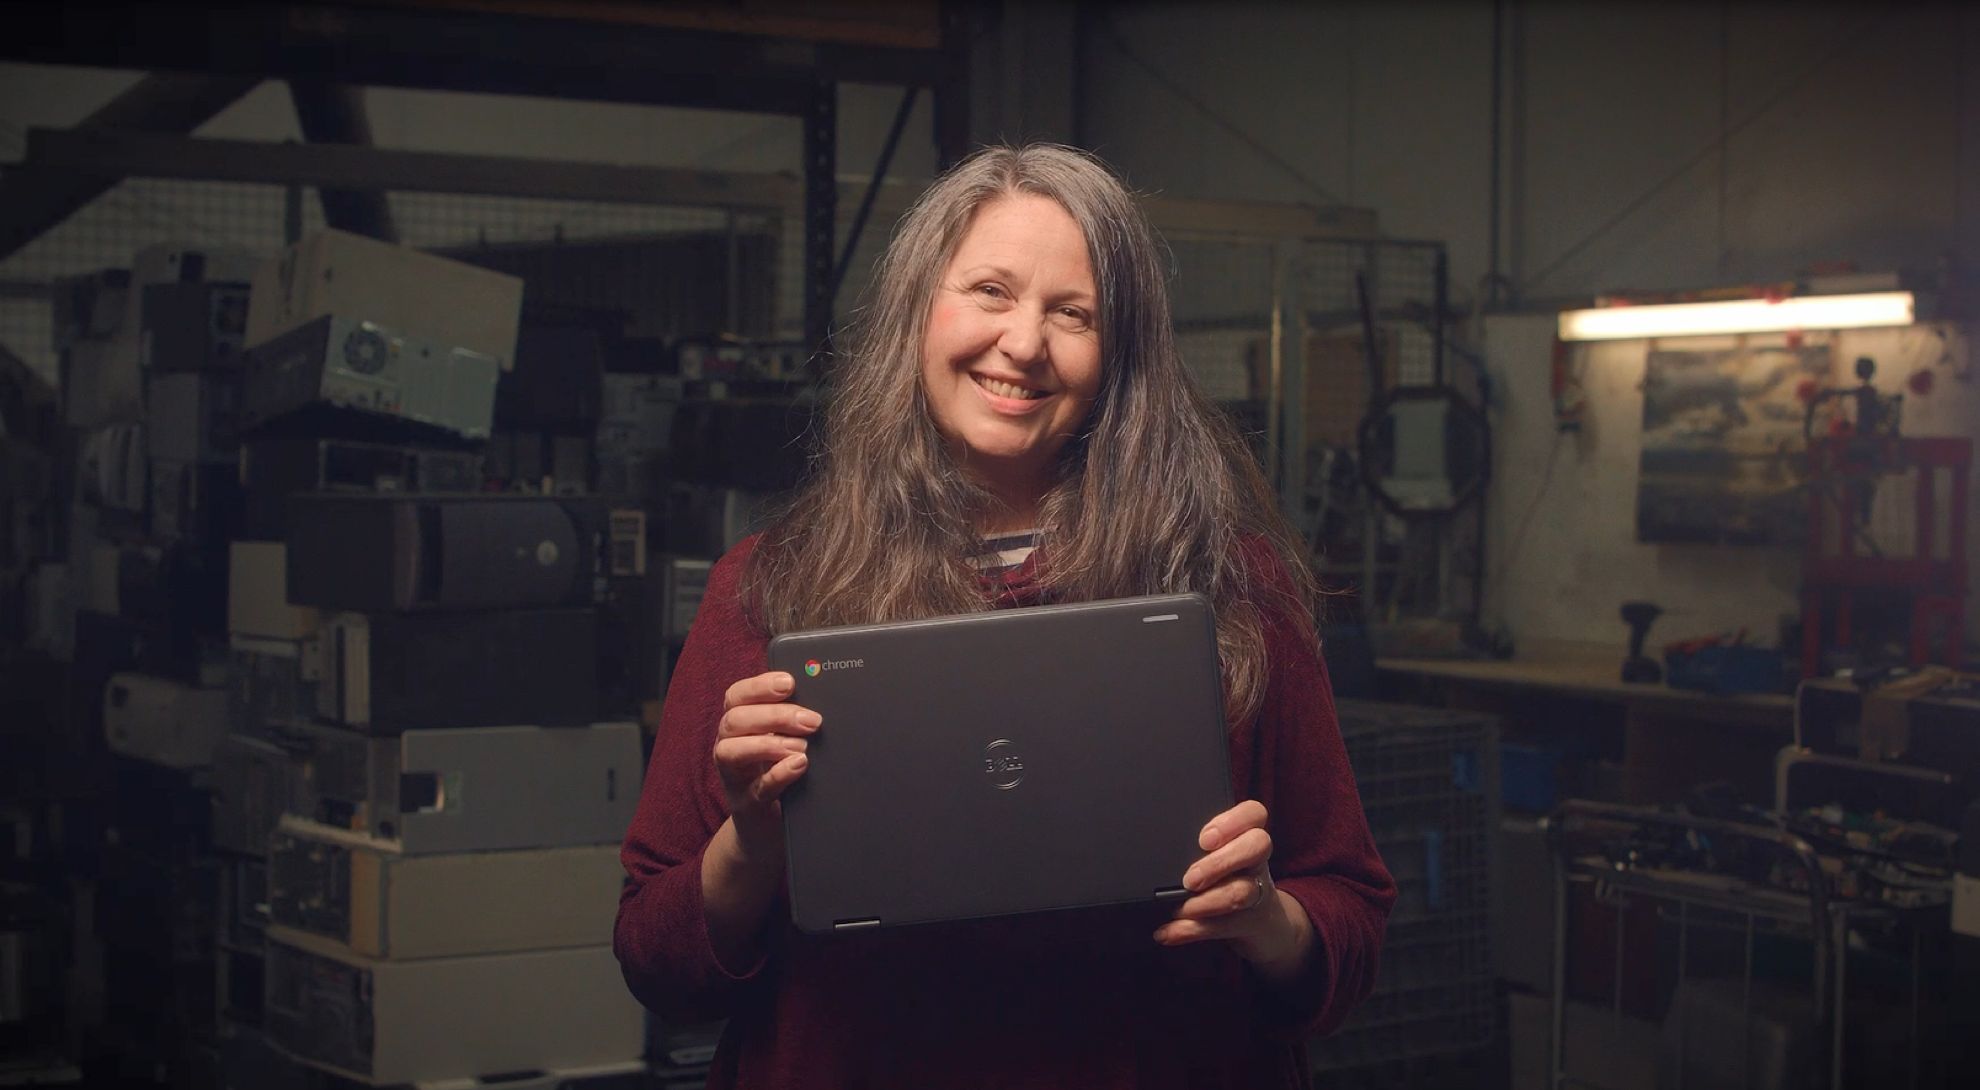 A laptop and its components being given a second chance at life